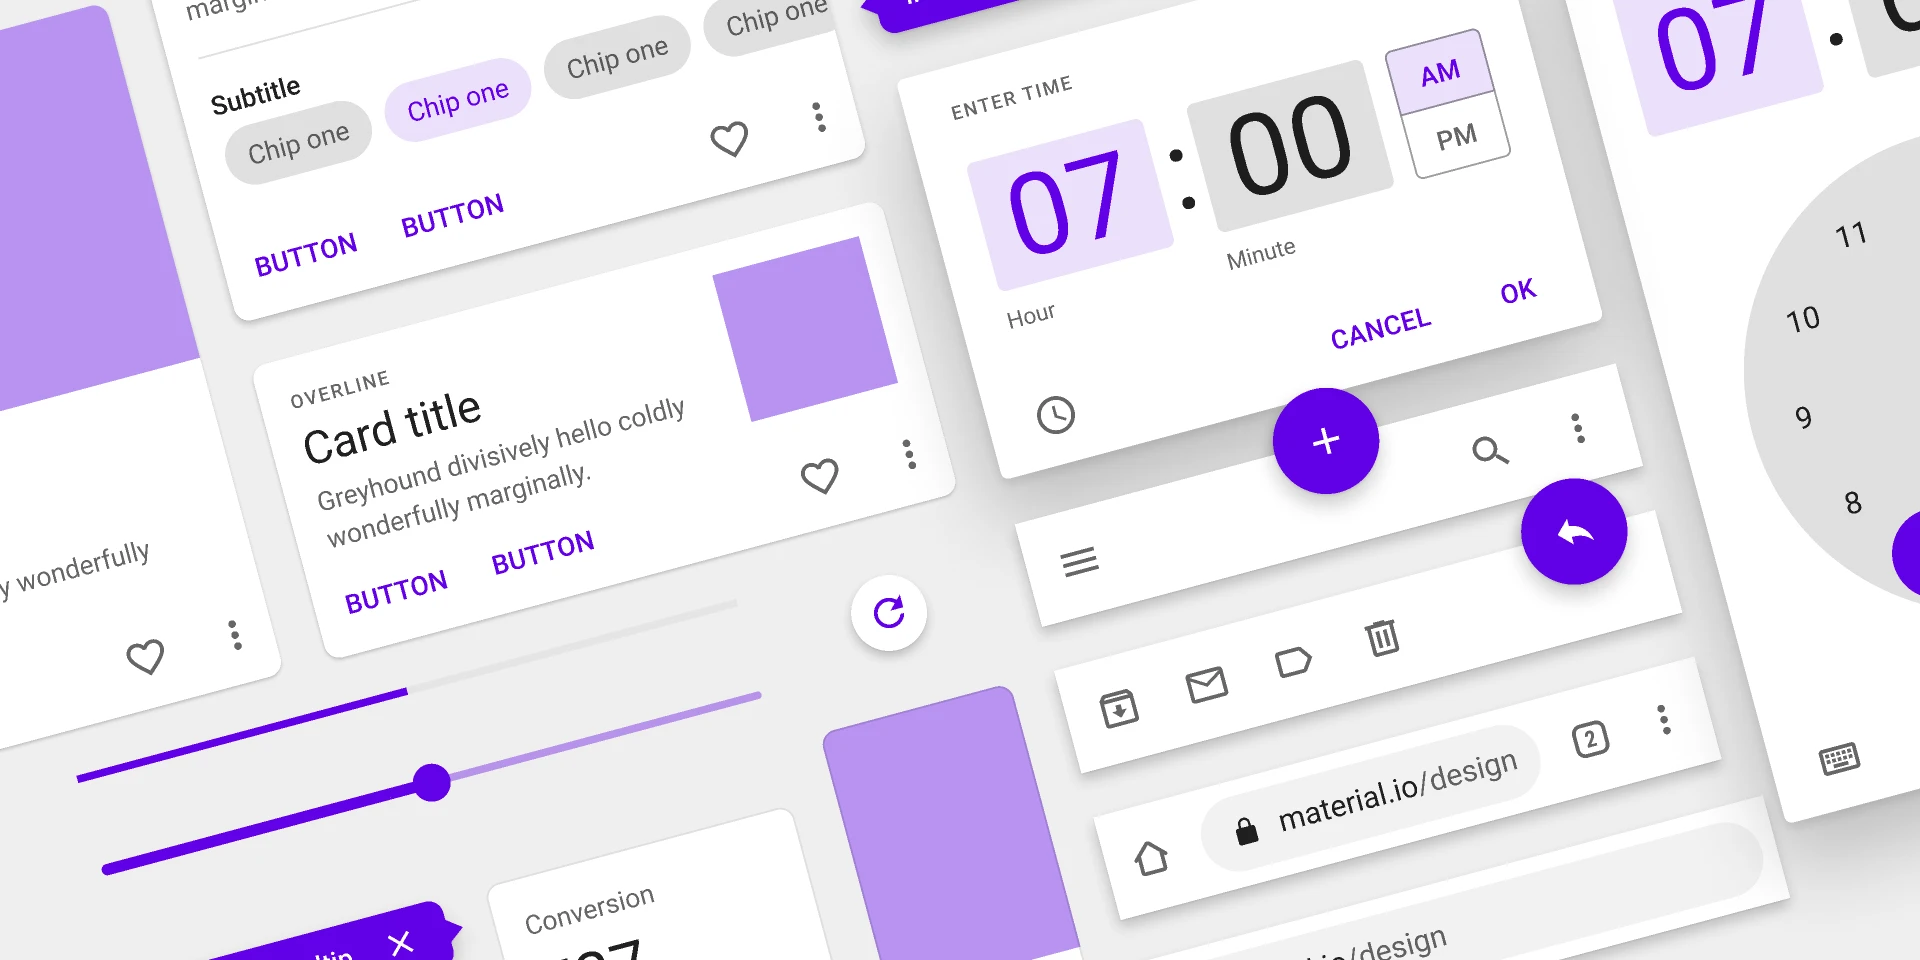 Material Design 2 supplemental kit* for Figma and Adobe XD